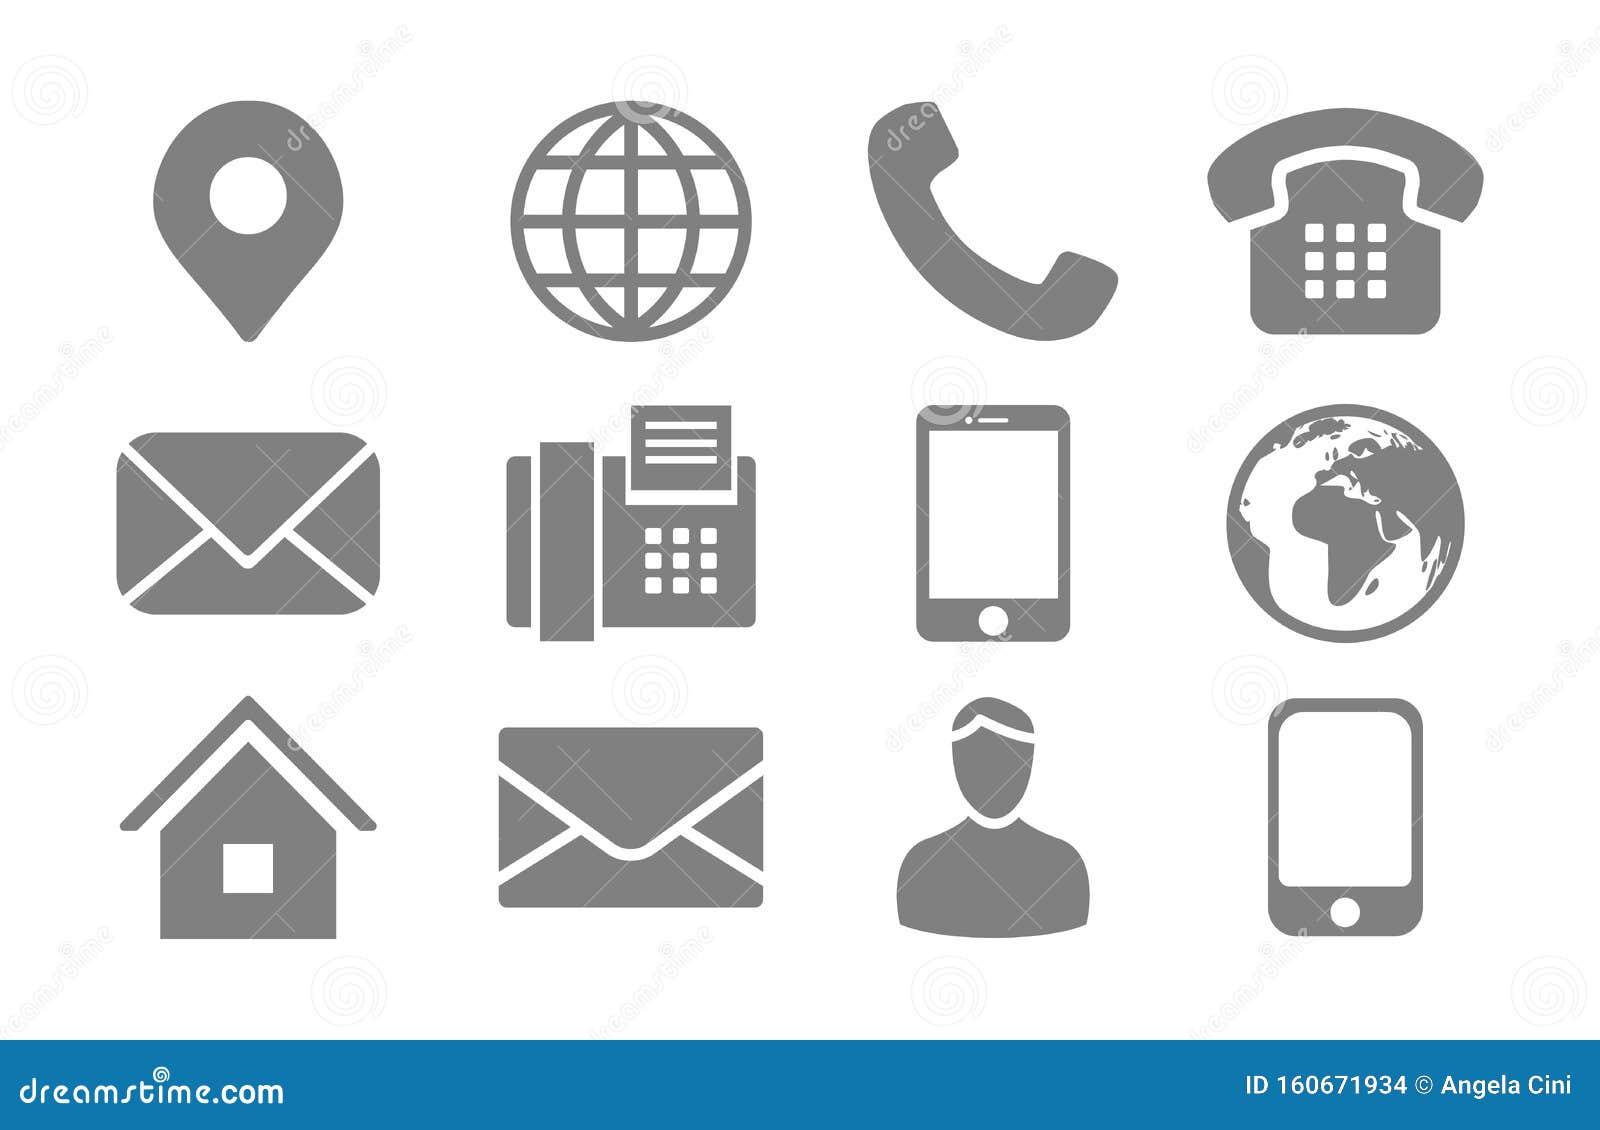 contact info icon set with location pin, phone, fax, cellphone, person and email icons